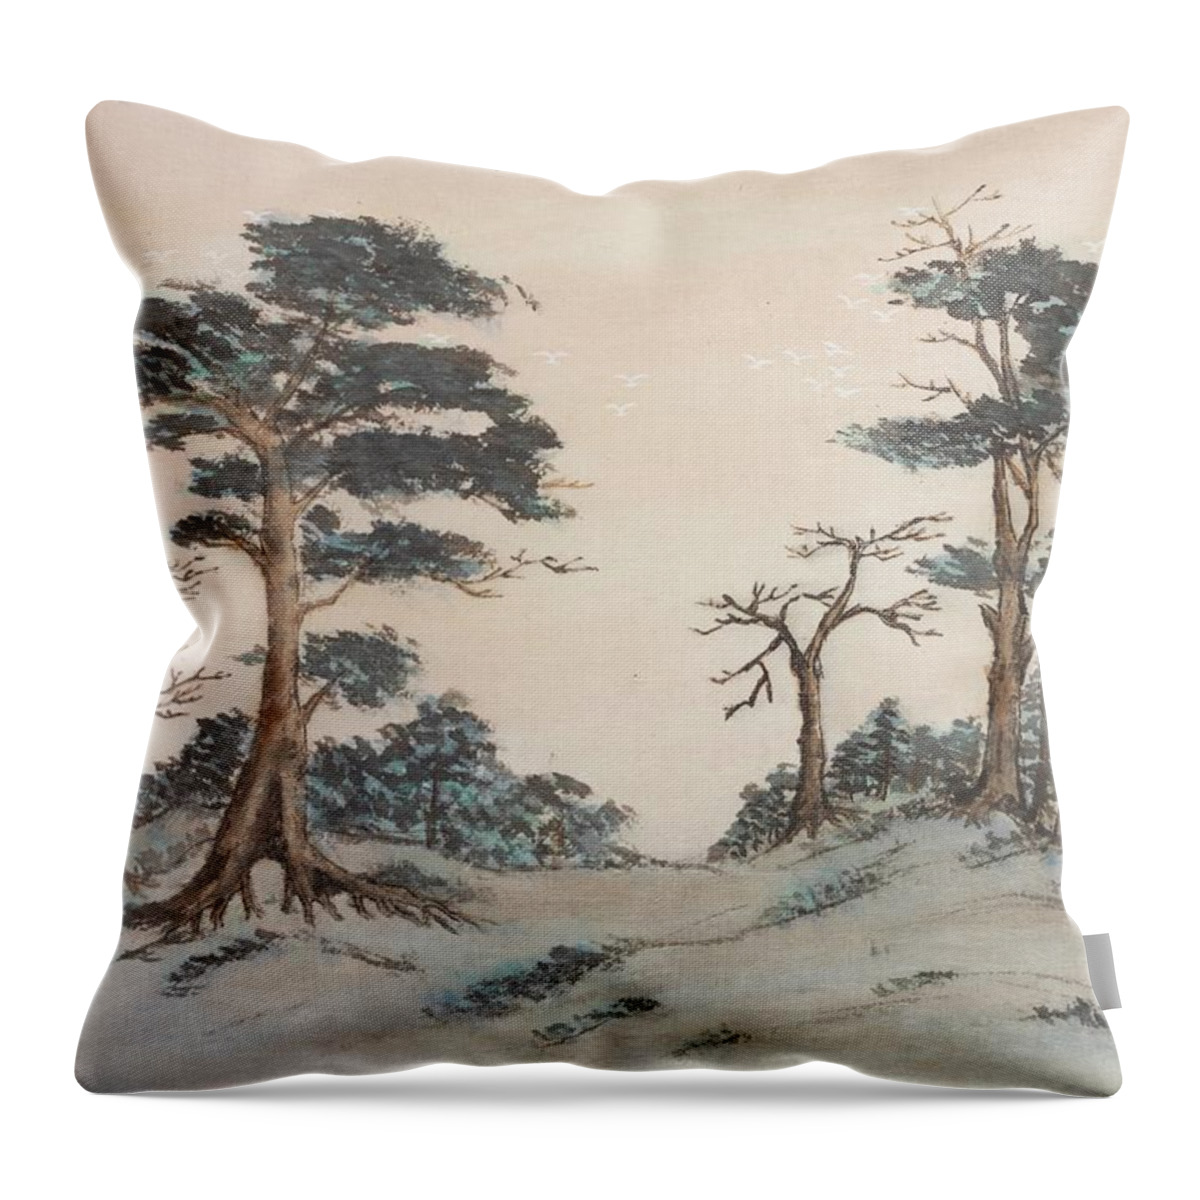 Chinese Watercolor Throw Pillow featuring the painting Flying White Birds  by Jenny Sanders